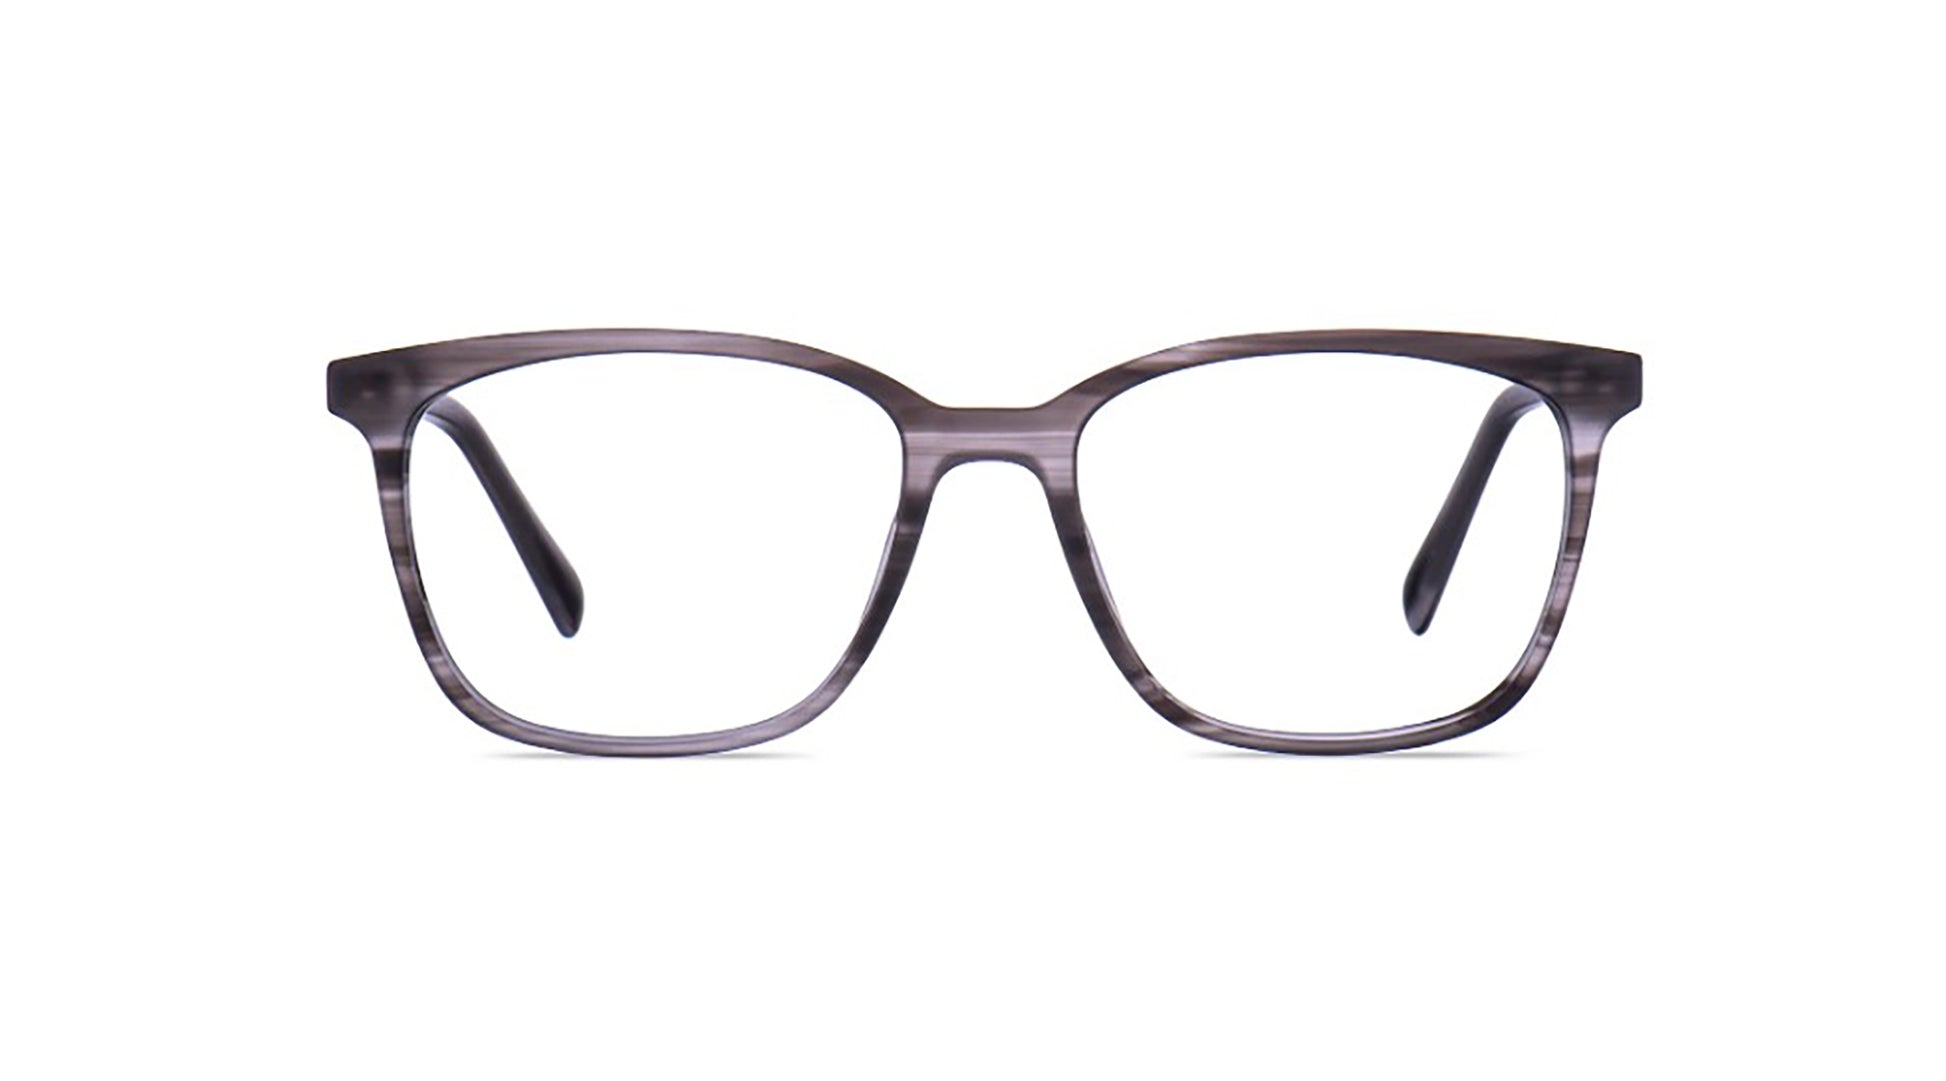 The Goodman is a larger square with soft corners. For those looking for a great fit in a larger frame.